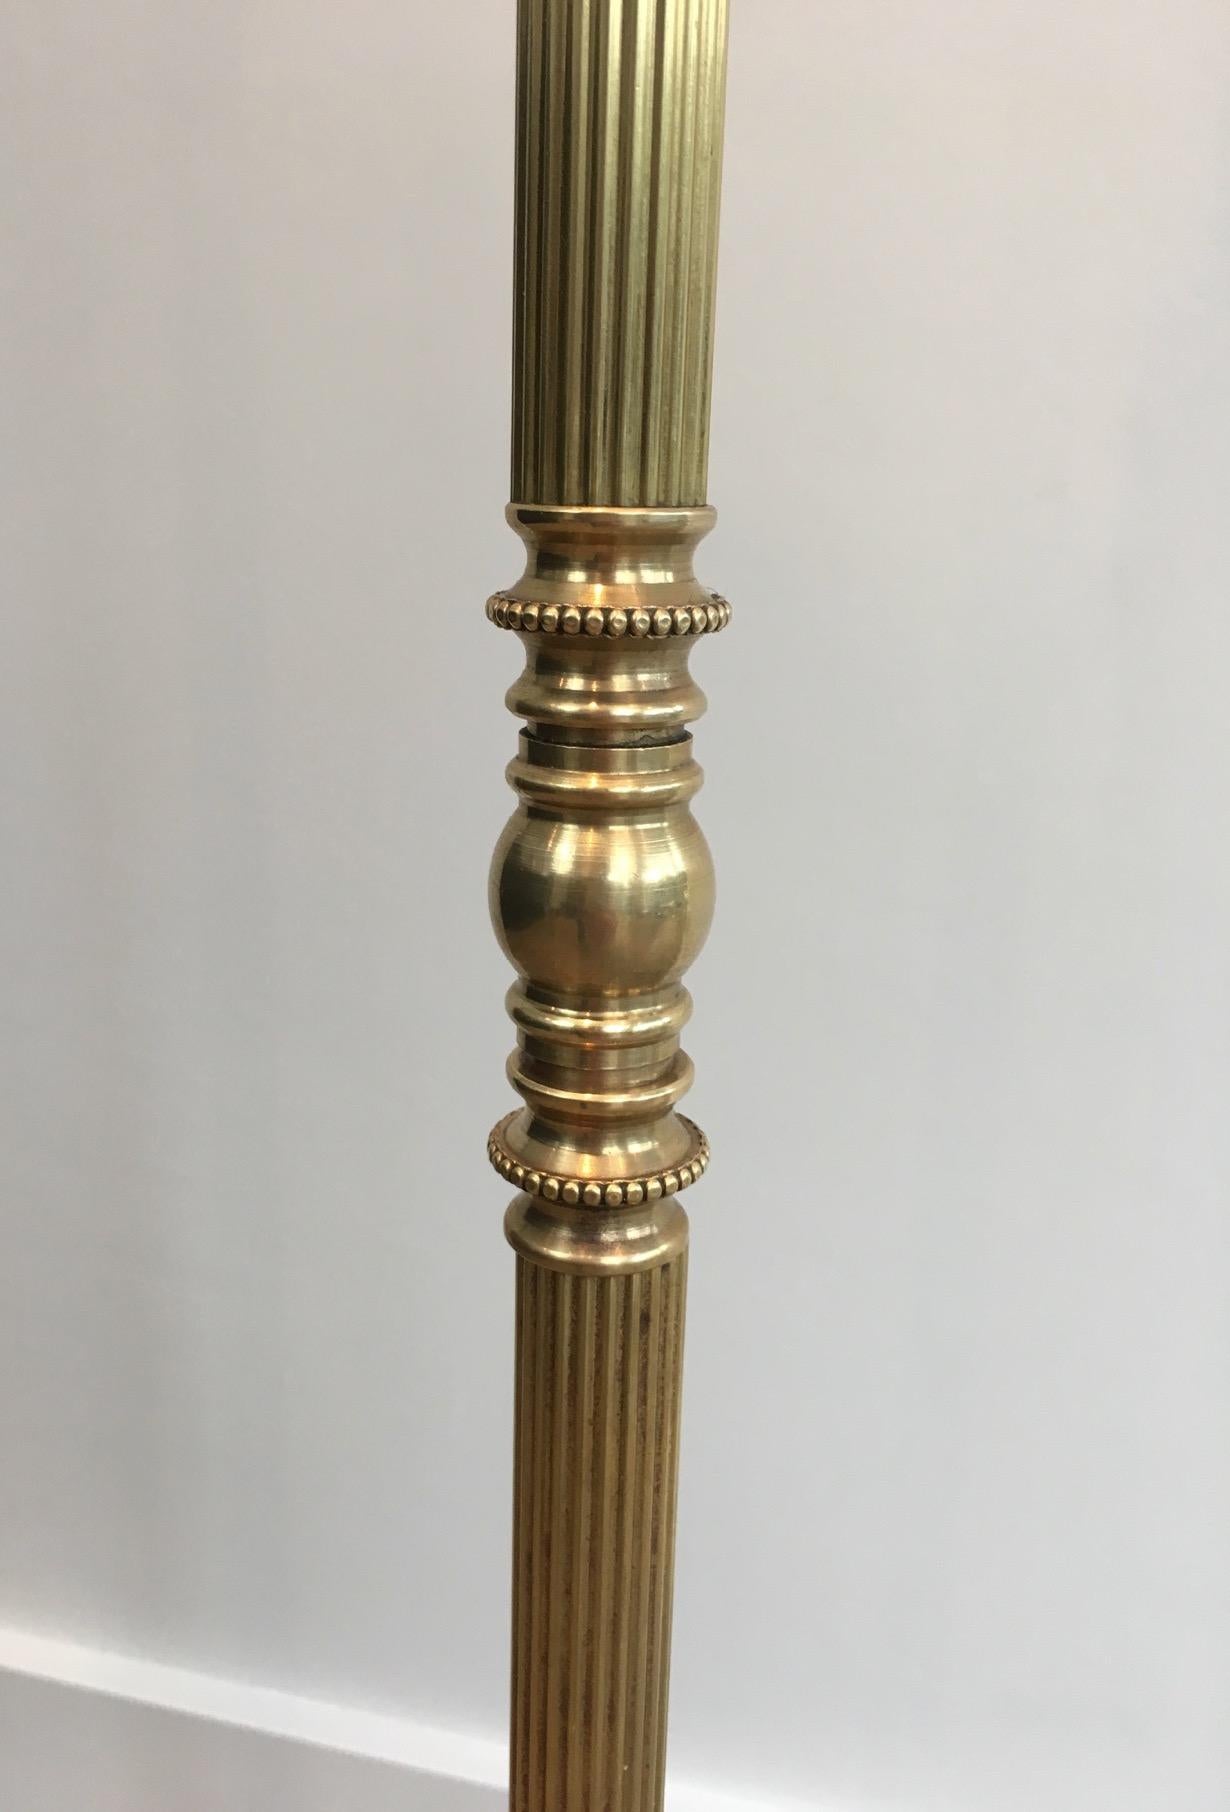 Neoclassical Ajustable Brass Floor Lamp with Tripode Base, circa 1940 For Sale 1